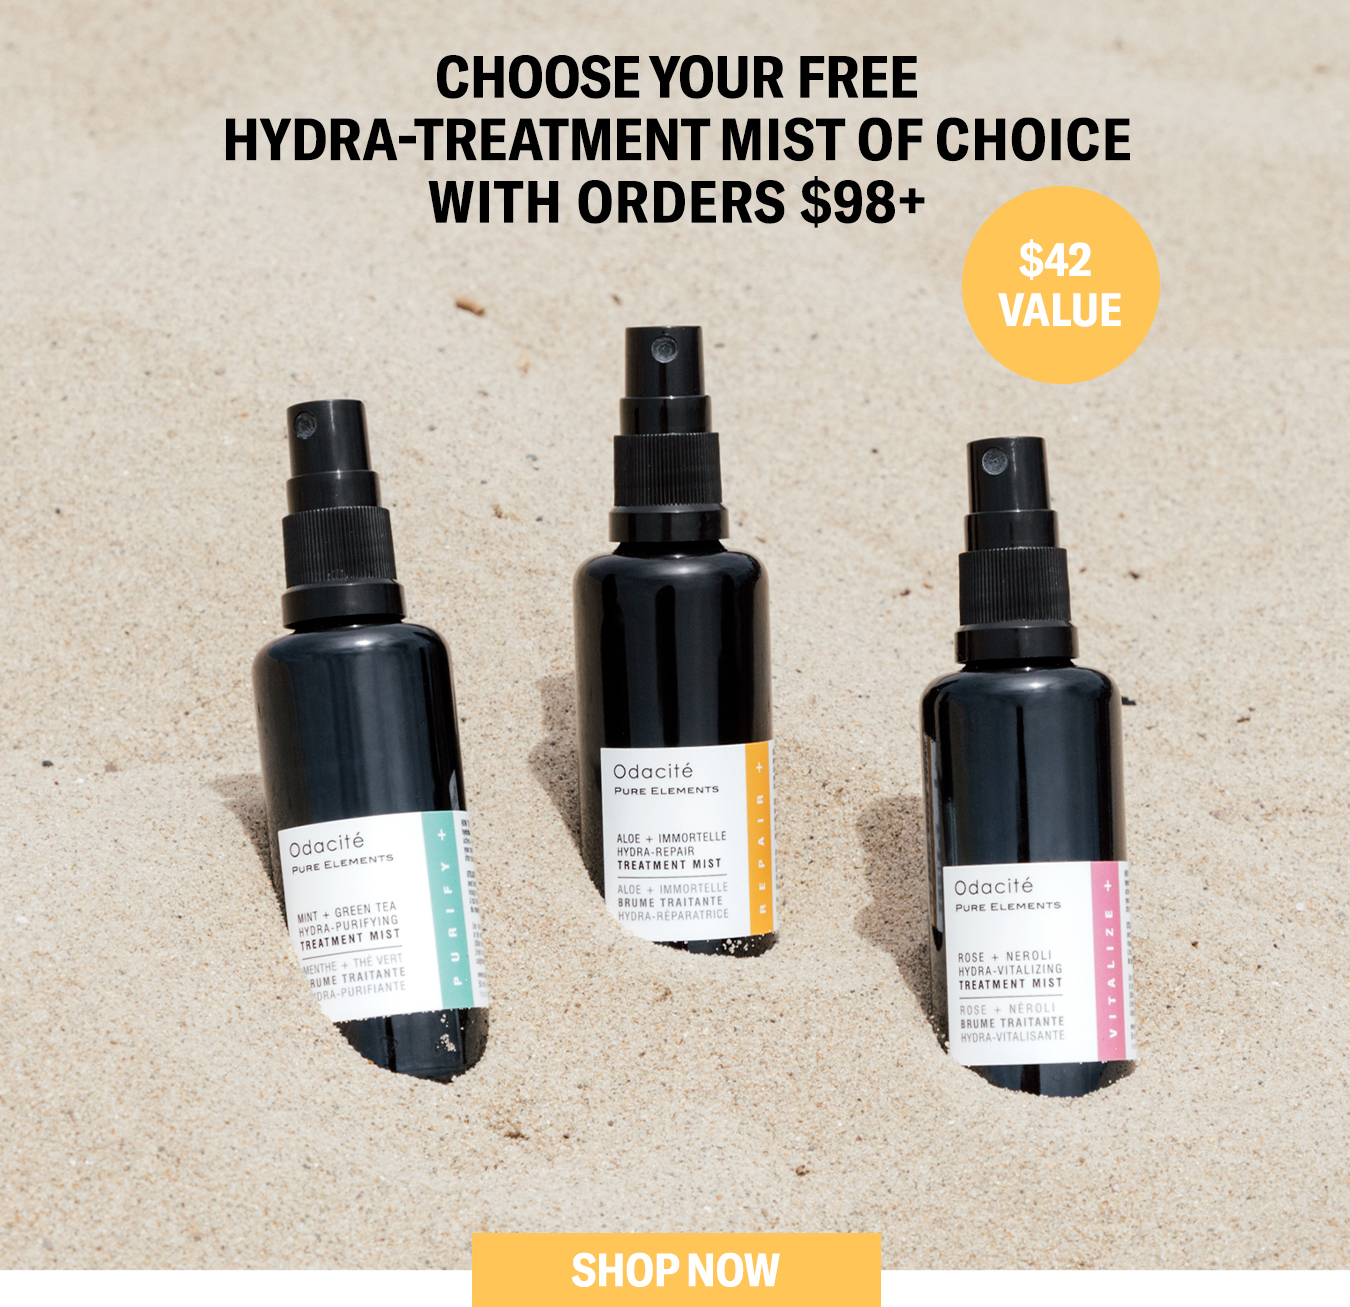 Choose your free Hydra-Treatment Mist of choice with order $98+